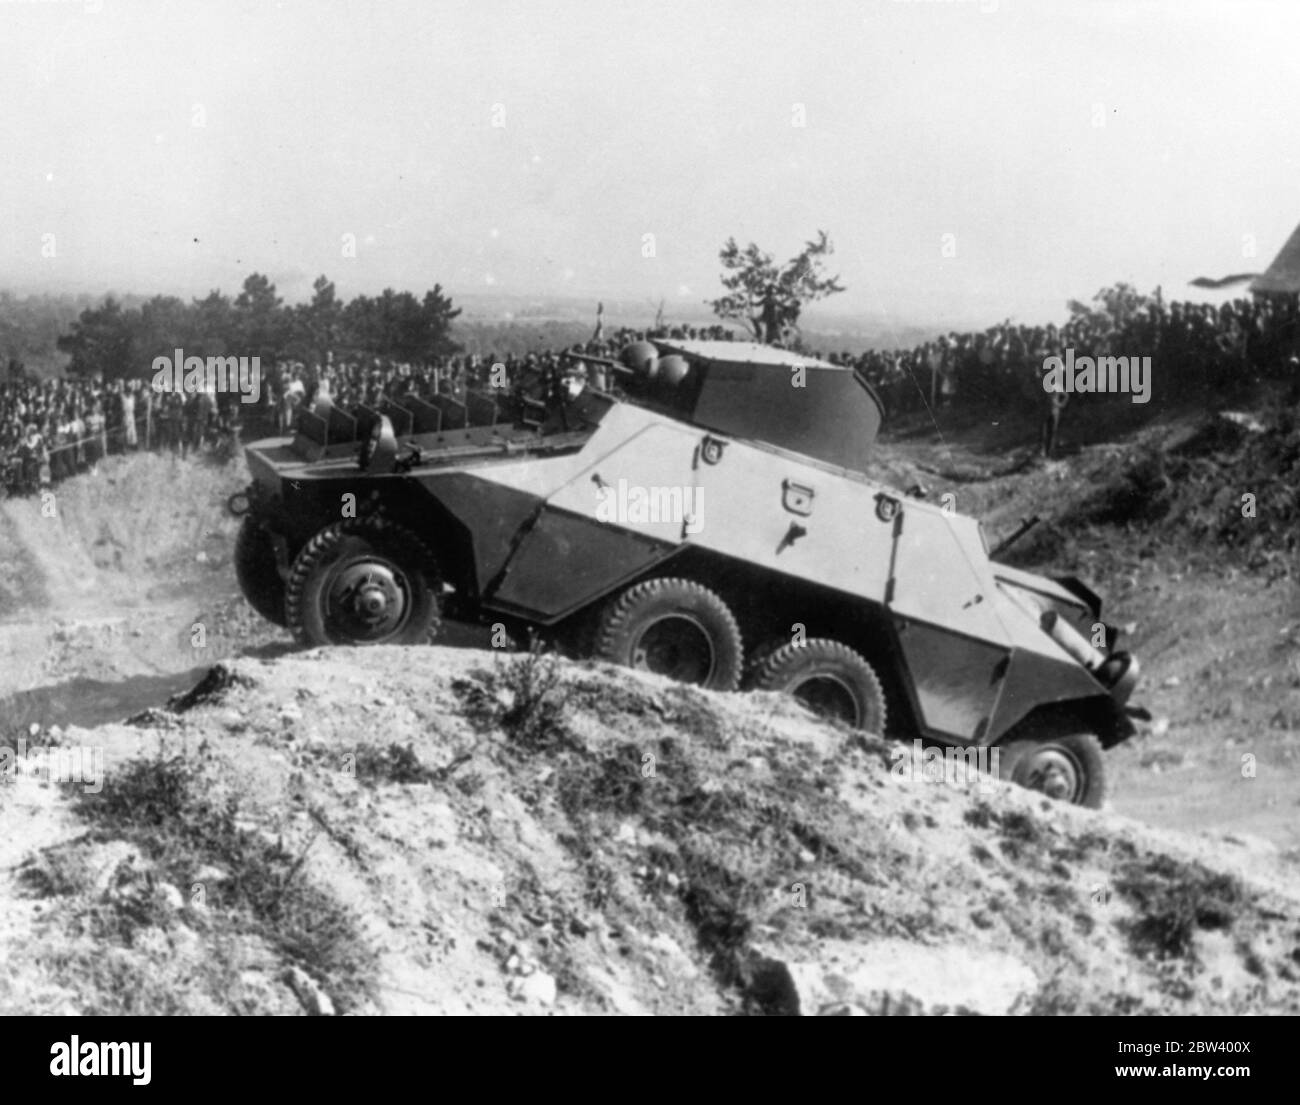 An eight wheeled armoured car demonstrated in Austrian army manoeuvres . A new type of 8 wheeled armoured car capable of surmounting the worst obstacles and maintaining a fair speed over the roughest ground , was demonstrated at the Austrian army manoeuvres near Bruck . Each of the eight wheels is independently sprung , enabling the car to maintain an even keel over the worst ground . Photo shows , the eight wheeled armoured car climbing over rough grounds at the Bruck military camp watched by a crowd . 22 September 1936 Stock Photo